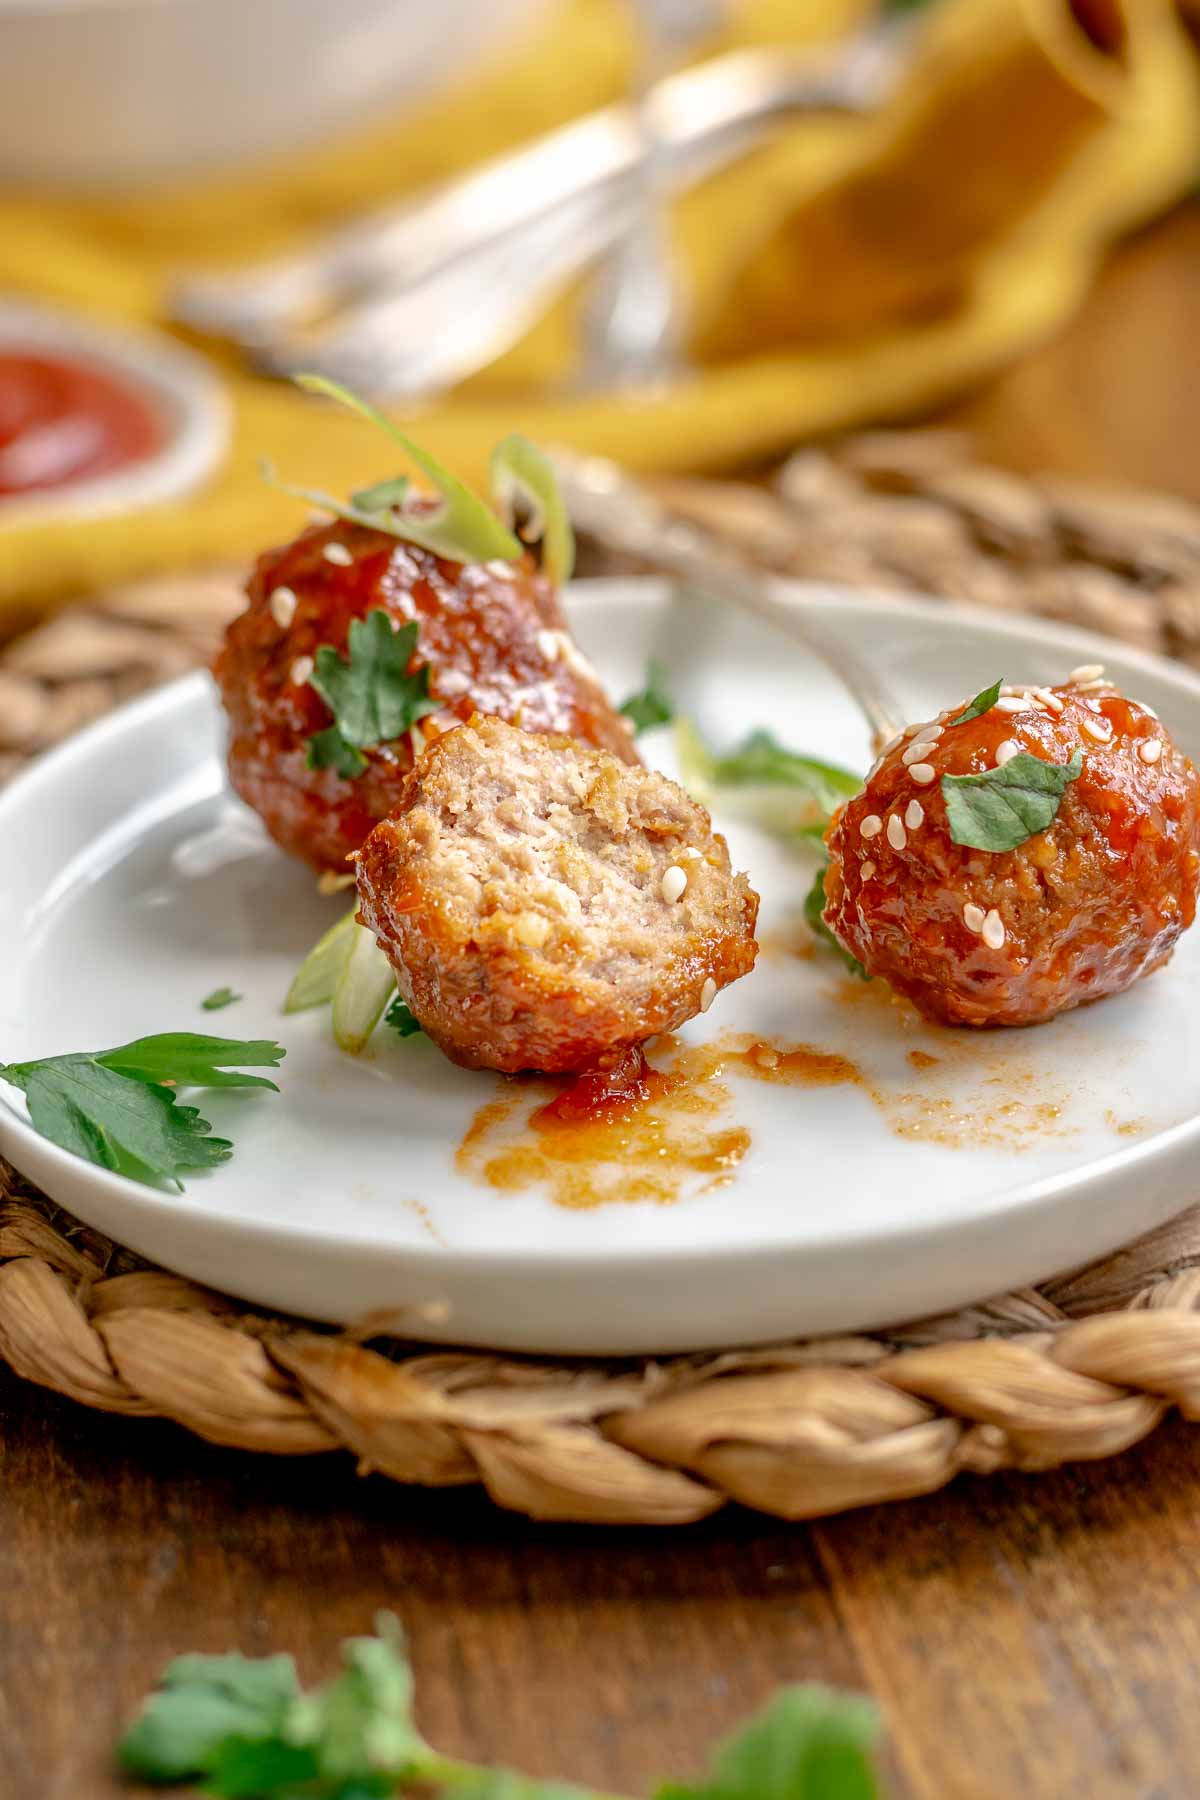 Honey sriracha meatballs on a plate. One is broken open to show the center.